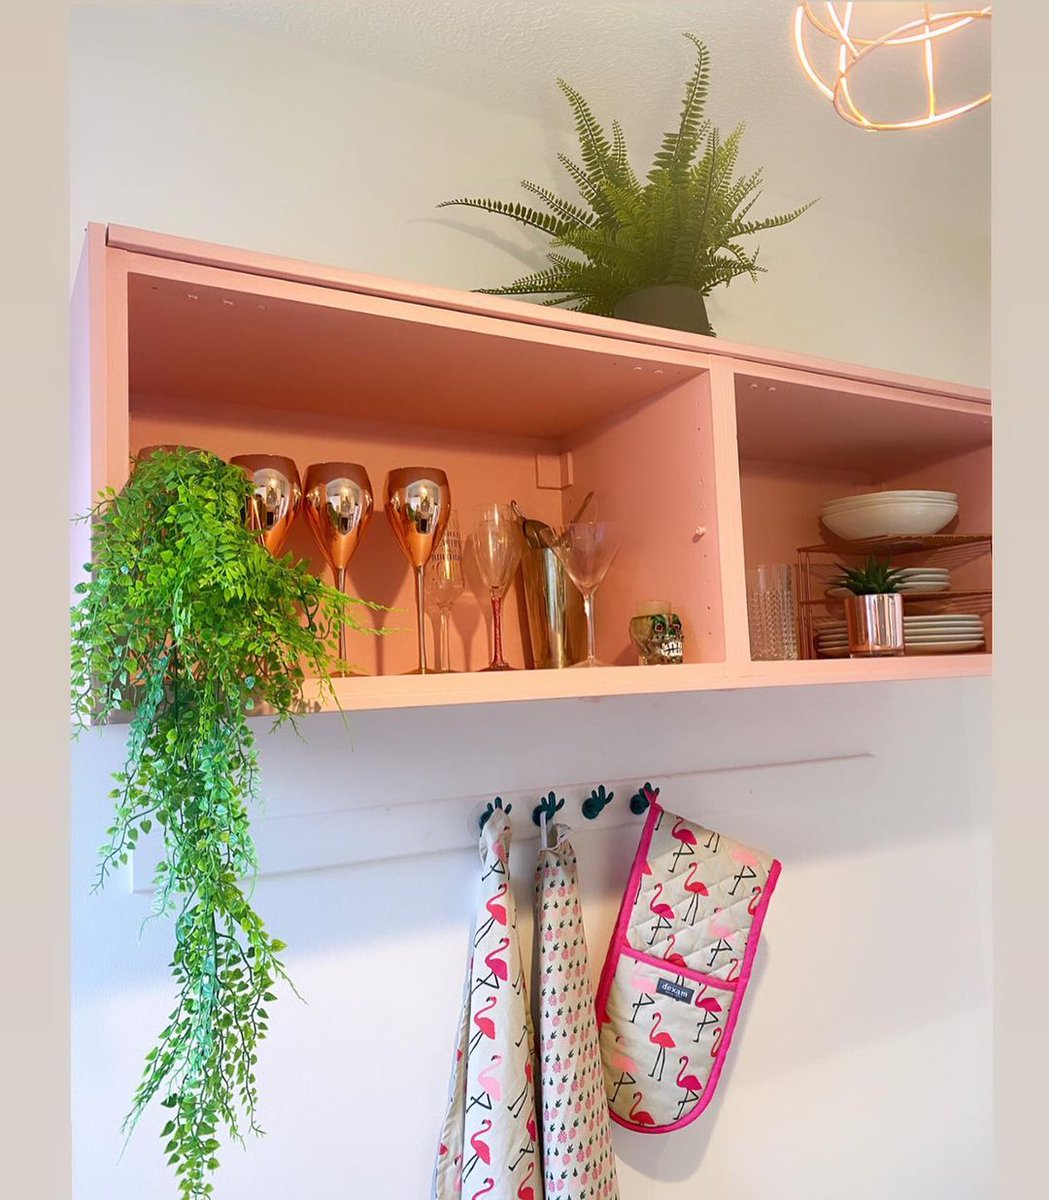 Pretty in pink 🌸 @wee_quirky_home's kitchen cupboard transformation has been done using our shade Pink Starburst, this delightful pop of colour accompanied by the decorative plants is giving us major summer vibes 😍 📷 @wee_quirky_home via Instagram bit.ly/3yKXtiQ